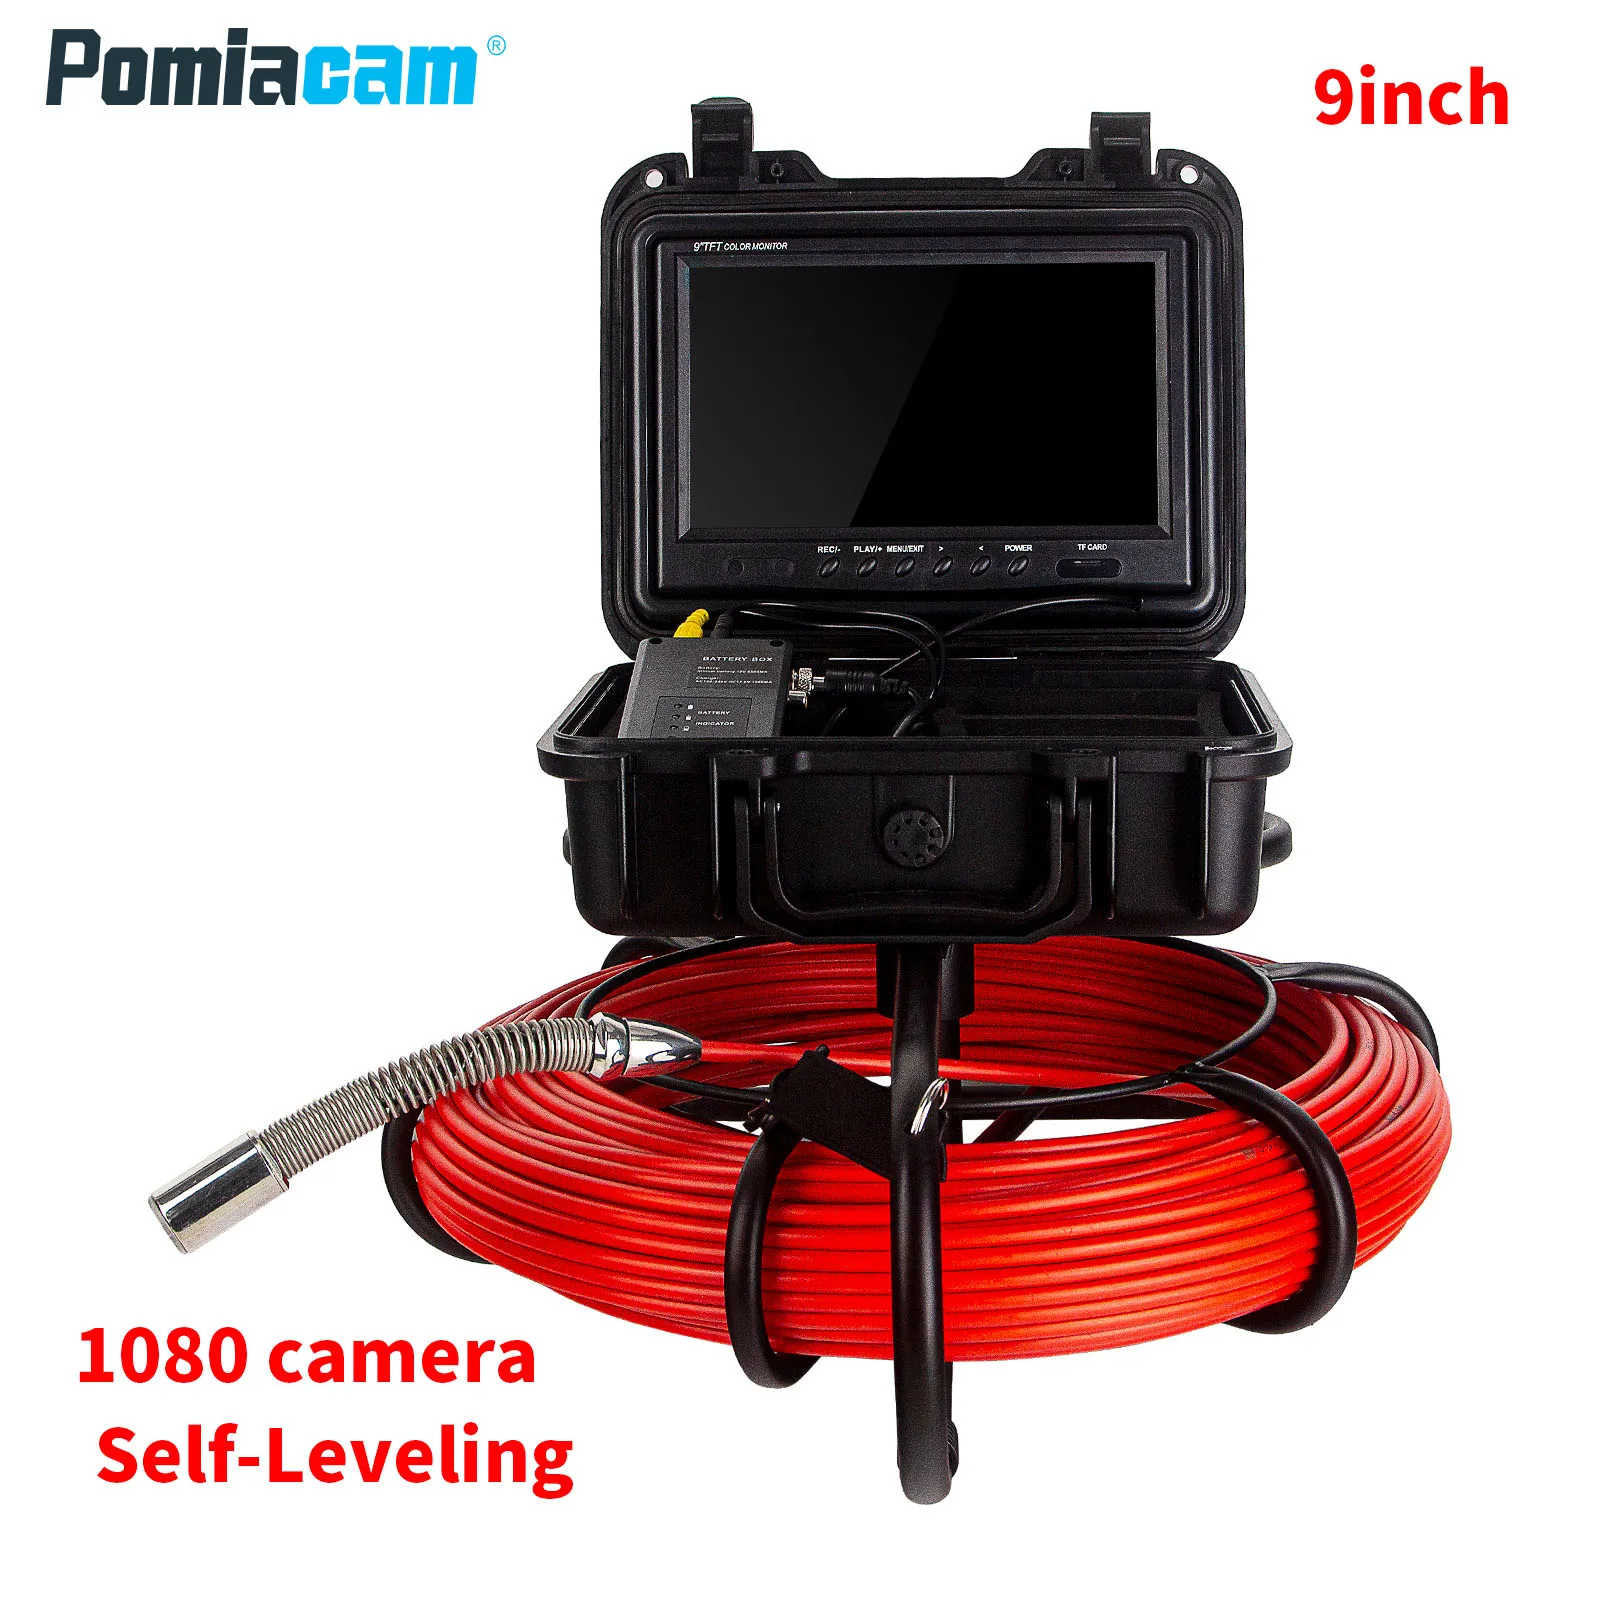 WP9600FW 1080P HD Sewer Pipe Inspection Self-balancing  endoscope camera 7mm red cable 50M 4500mAh battery for Pipeline repair